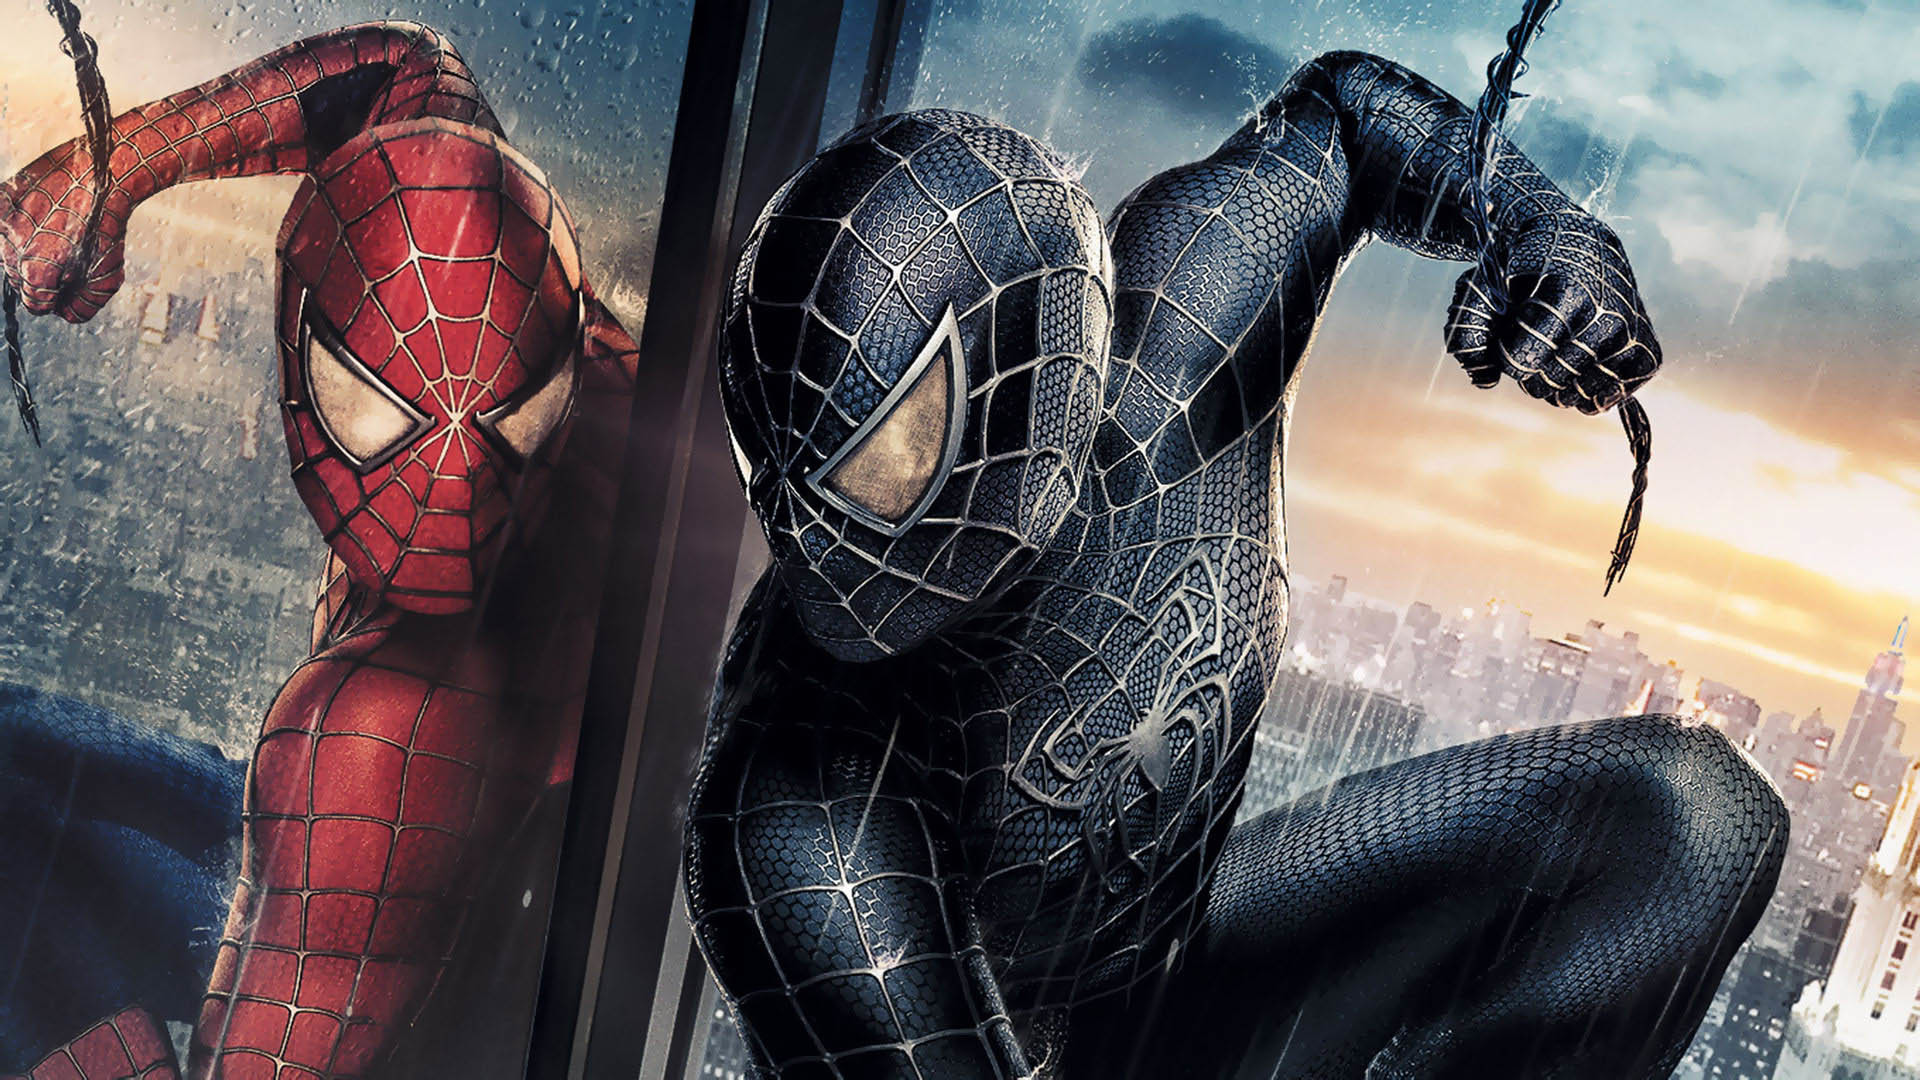 1920x1080 Spiderman 3 - Reflection in a building -  - Full HD 16/9 .